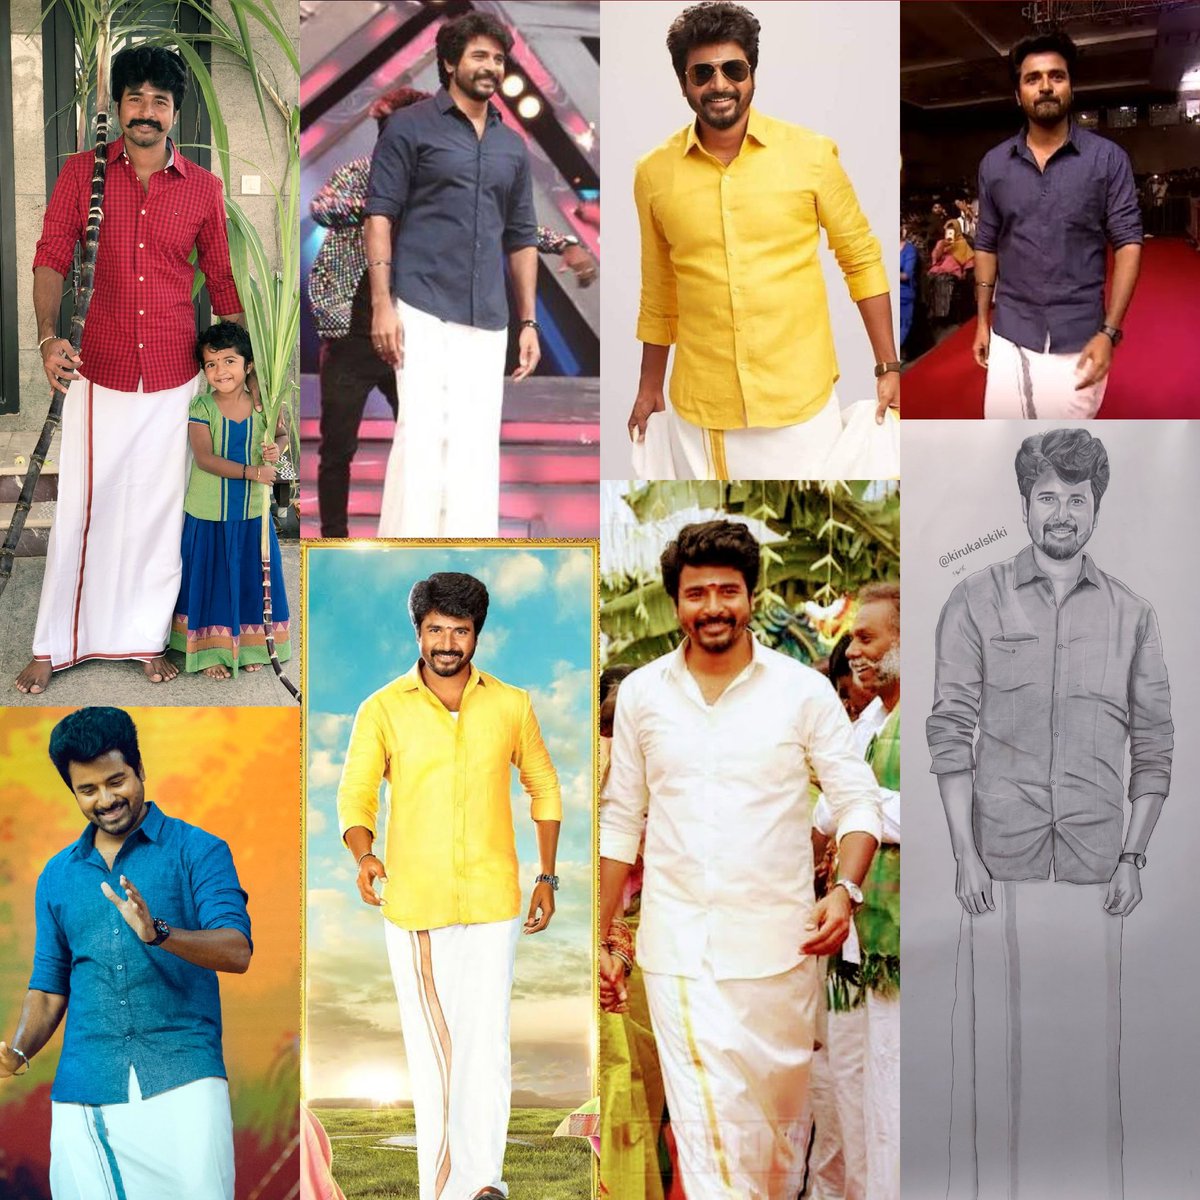   #VESHTIconSKWhat a amsam!Just overflowing with ur simplicity in traditional way of handsomeness Thani Azhagu thalaivaa